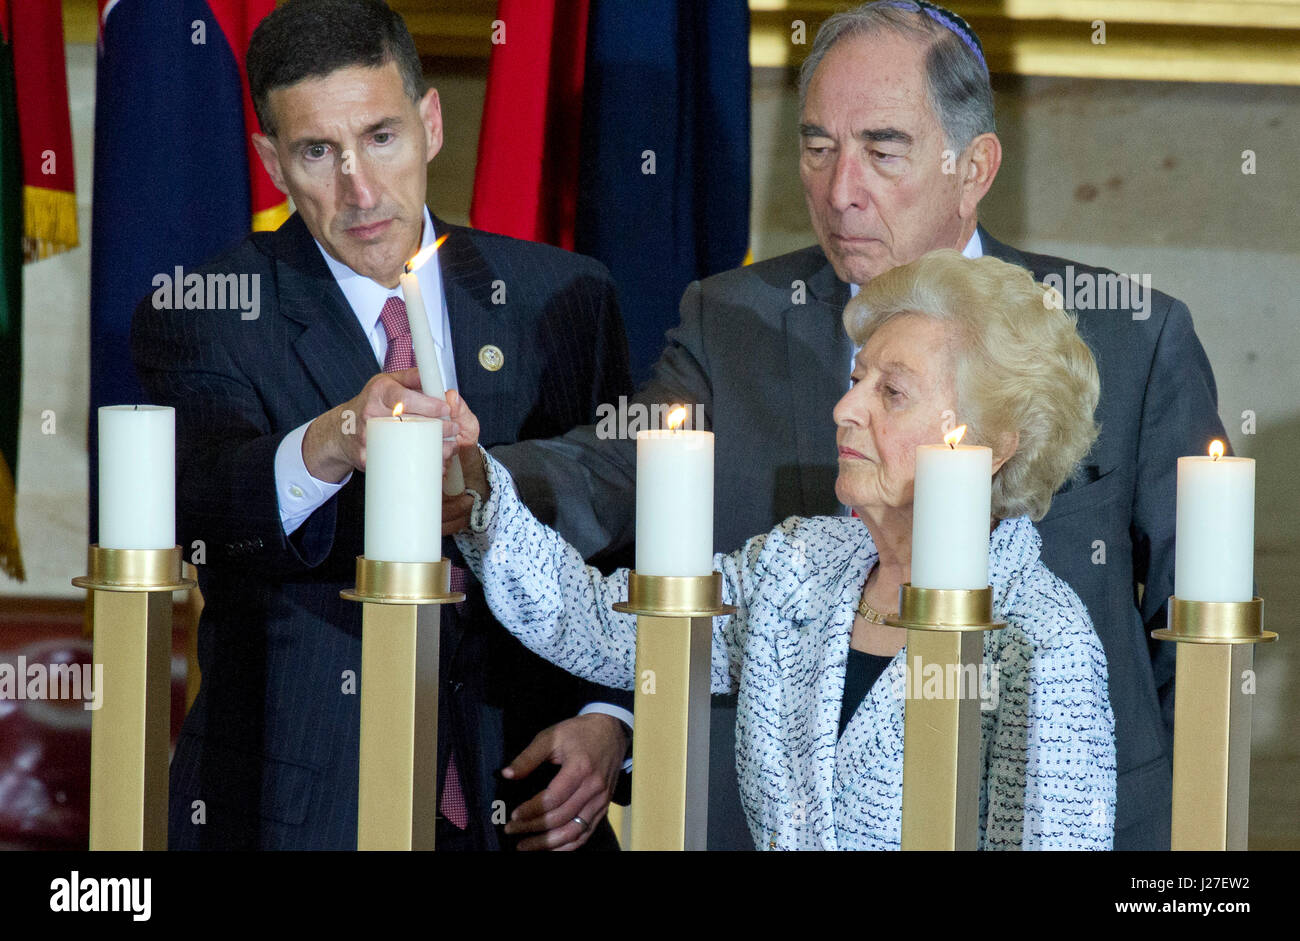 Washington, USA. 25th Apr, 2017. United States Representative David Kustoff (Republican of Tennessee), left, helps Irene Weiss, Holocaust Survivor, lower right, light a candle as Emanuel Mandel, Holocaust Survivor, center, looks on following US President Donald J. Trump's remarks at the National Commemoration of the Days of Remembrance ceremony in the Rotunda of the US Capitol in Washington, DC on Tuesday, April 25, 2017. Credit: MediaPunch Inc/Alamy Live News Stock Photo